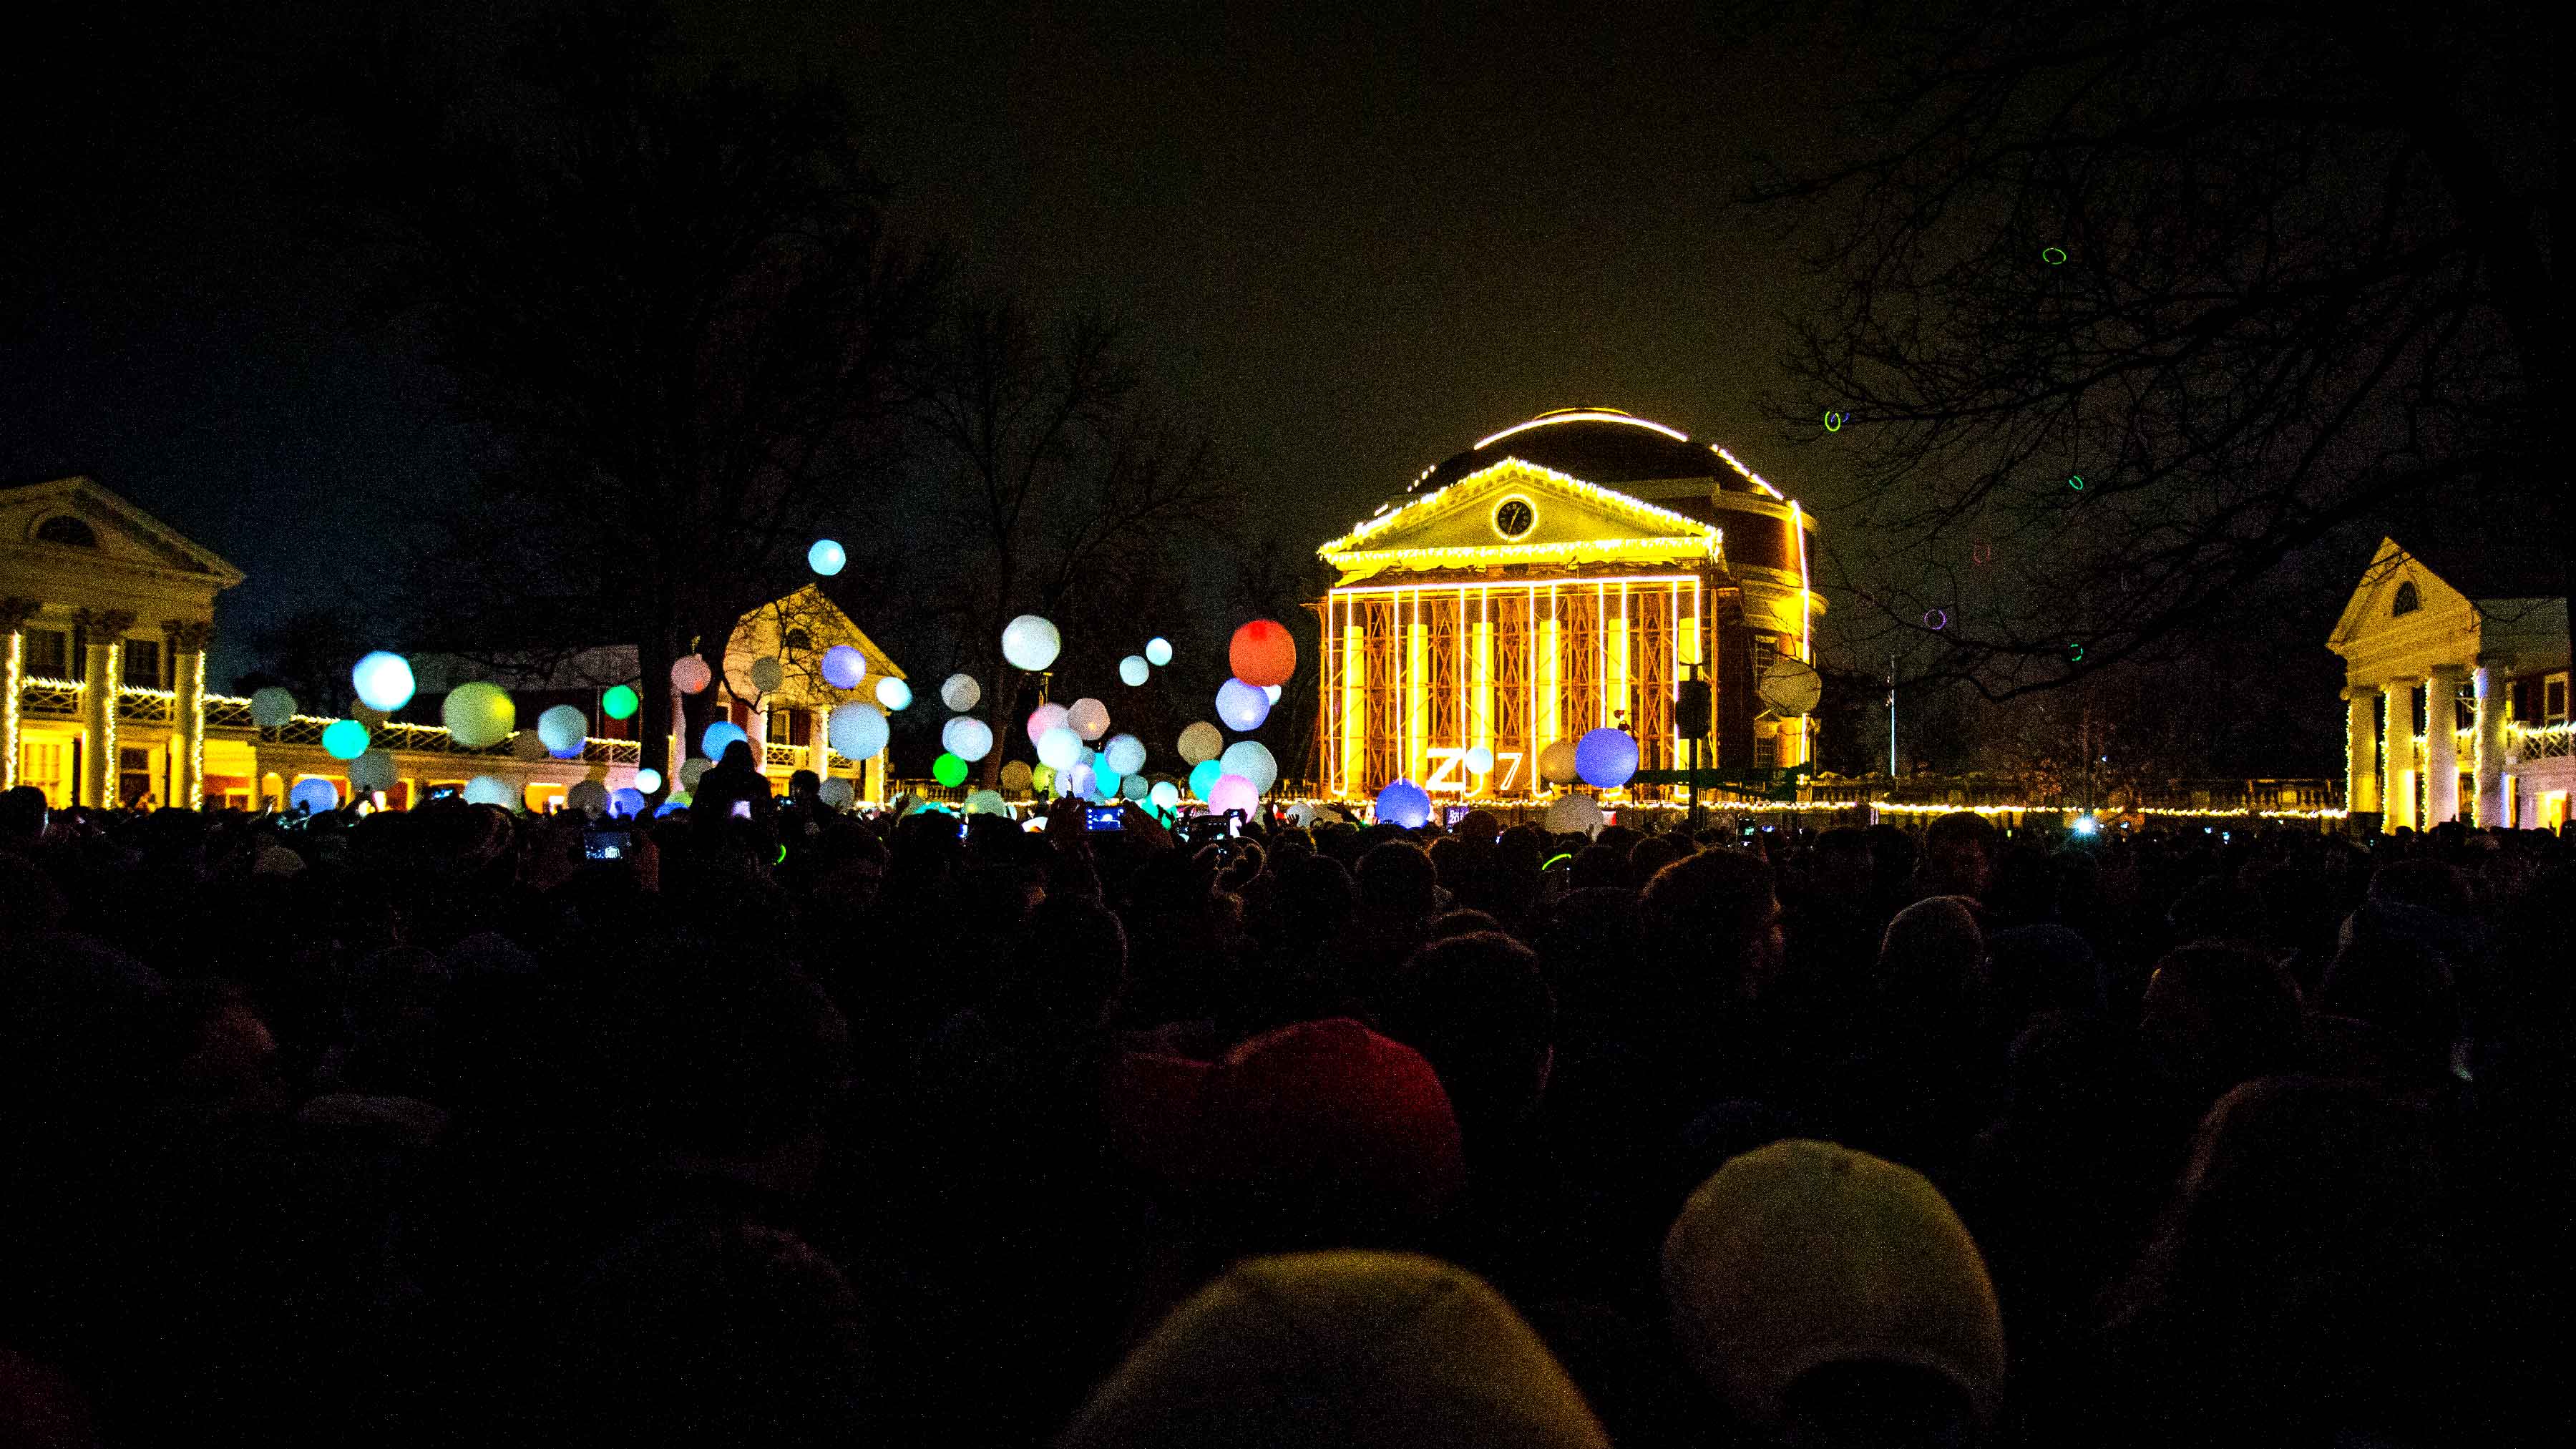 The Lawn full of people wearing lighted necklaces, hitting lit up balls, with the rotunda all lit up in the background